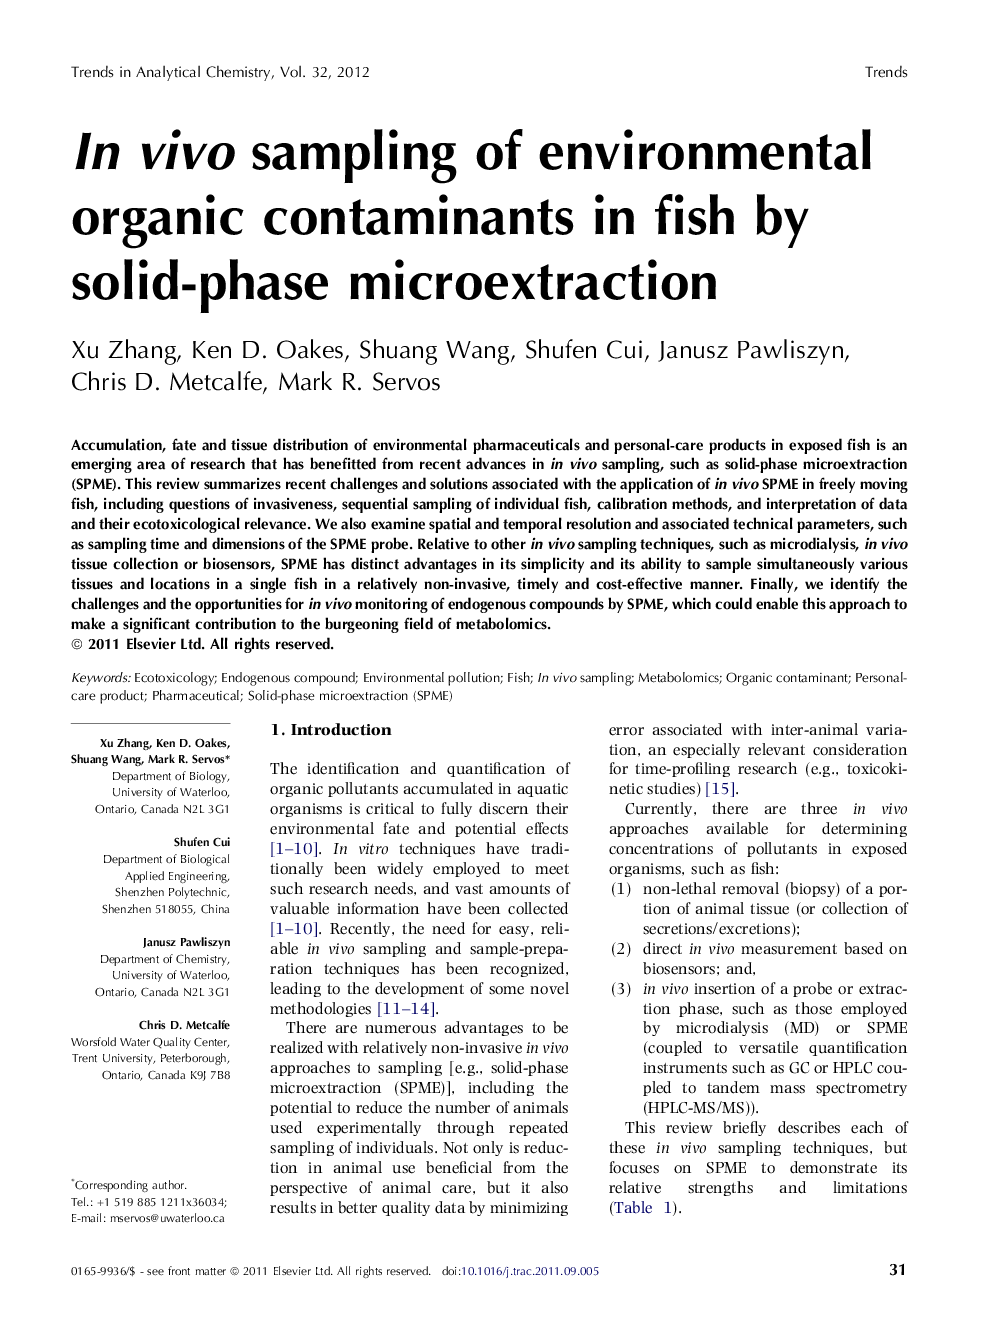 In vivo sampling of environmental organic contaminants in fish by solid-phase microextraction